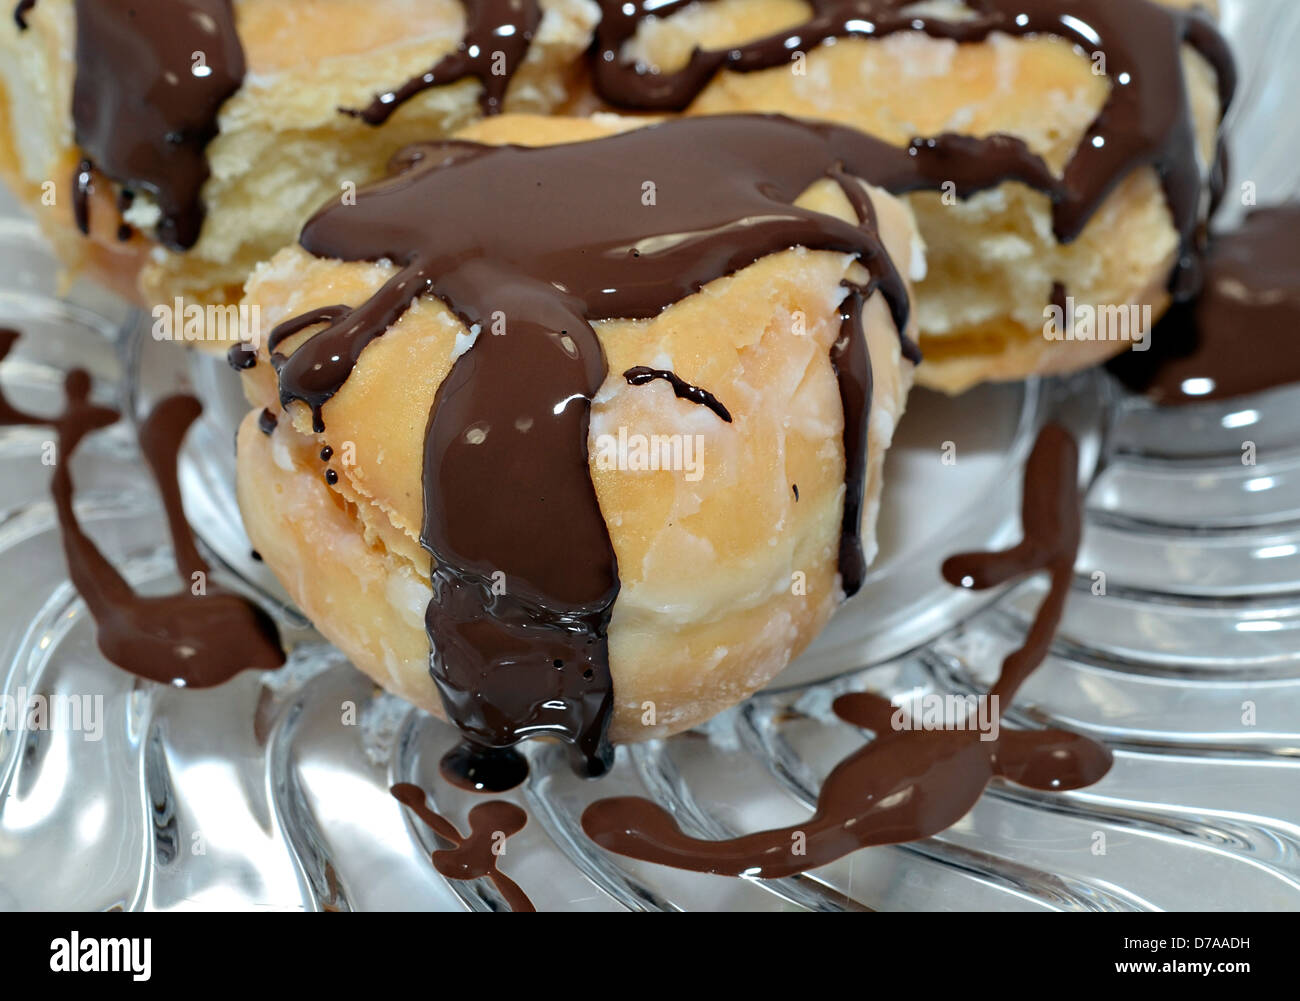 Sweet pastry with sugar and chocolate icing. Stock Photo